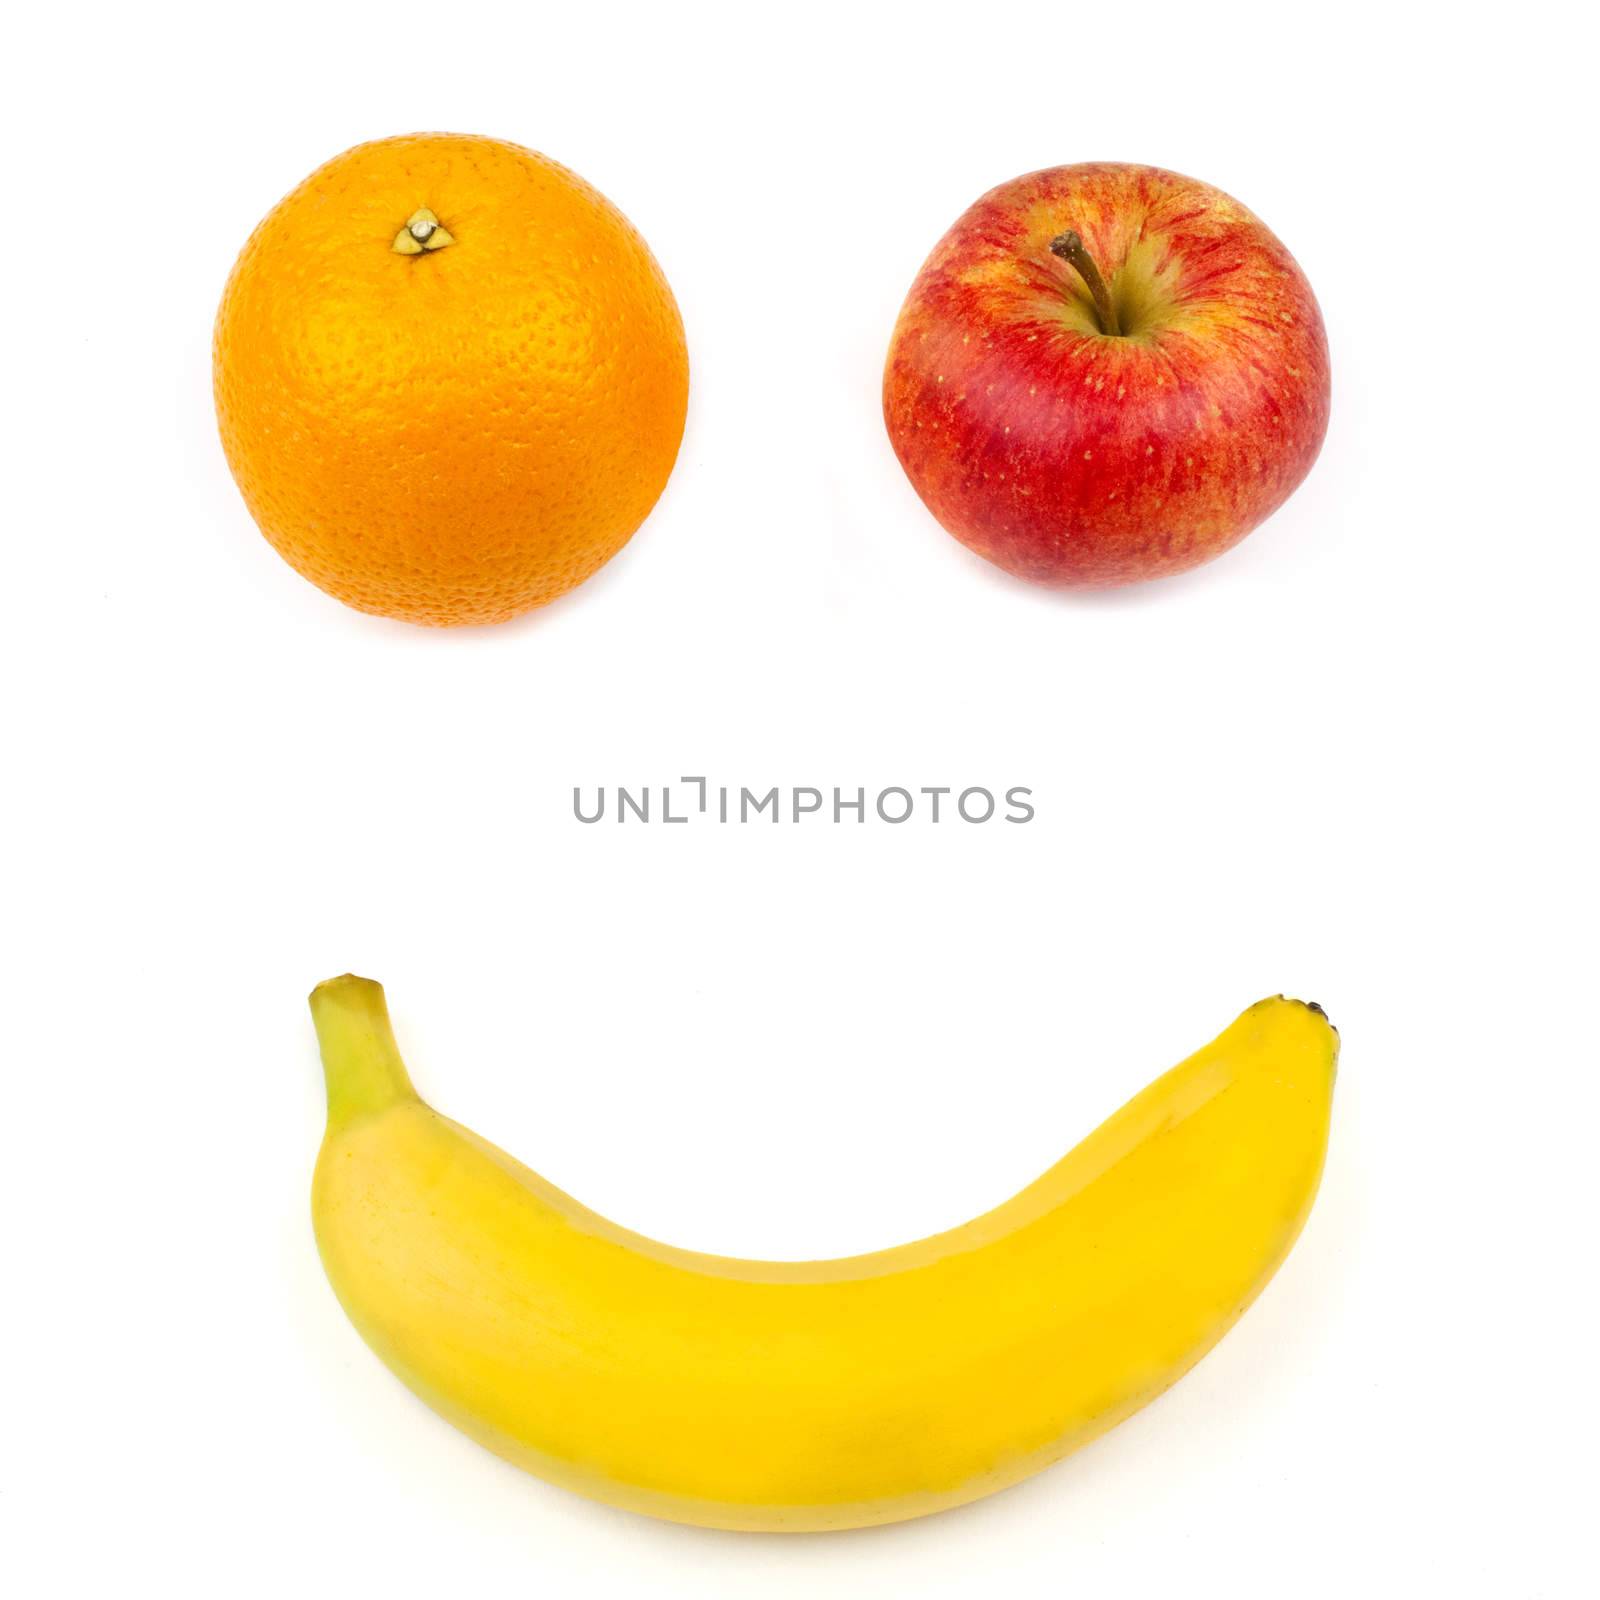 Three different pieces of fruit making up a smiling face over a white background.